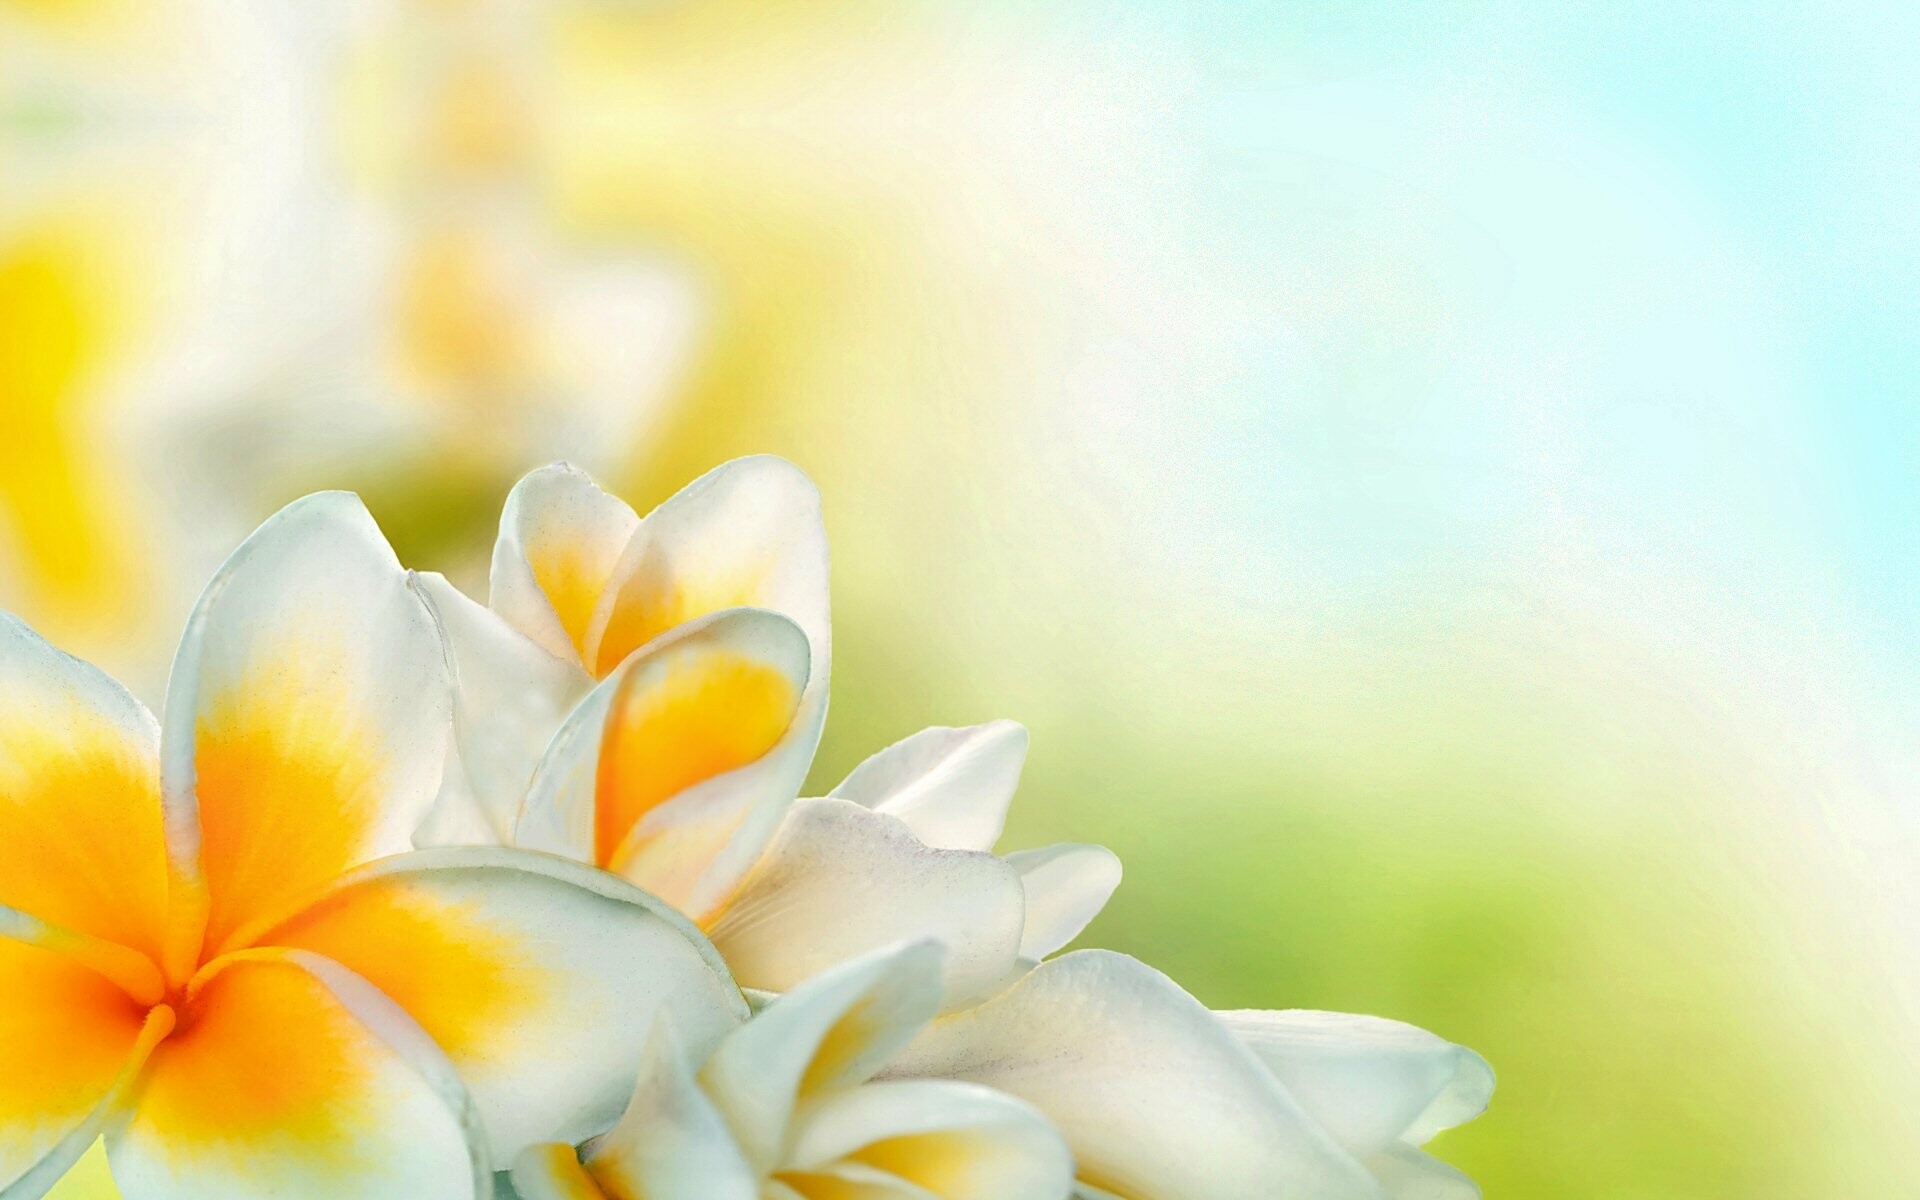 Frangipani Flower: Popular in landscaping because of the seemingly endless variety of the color, size, and fragrance of their blossoms. 1920x1200 HD Wallpaper.